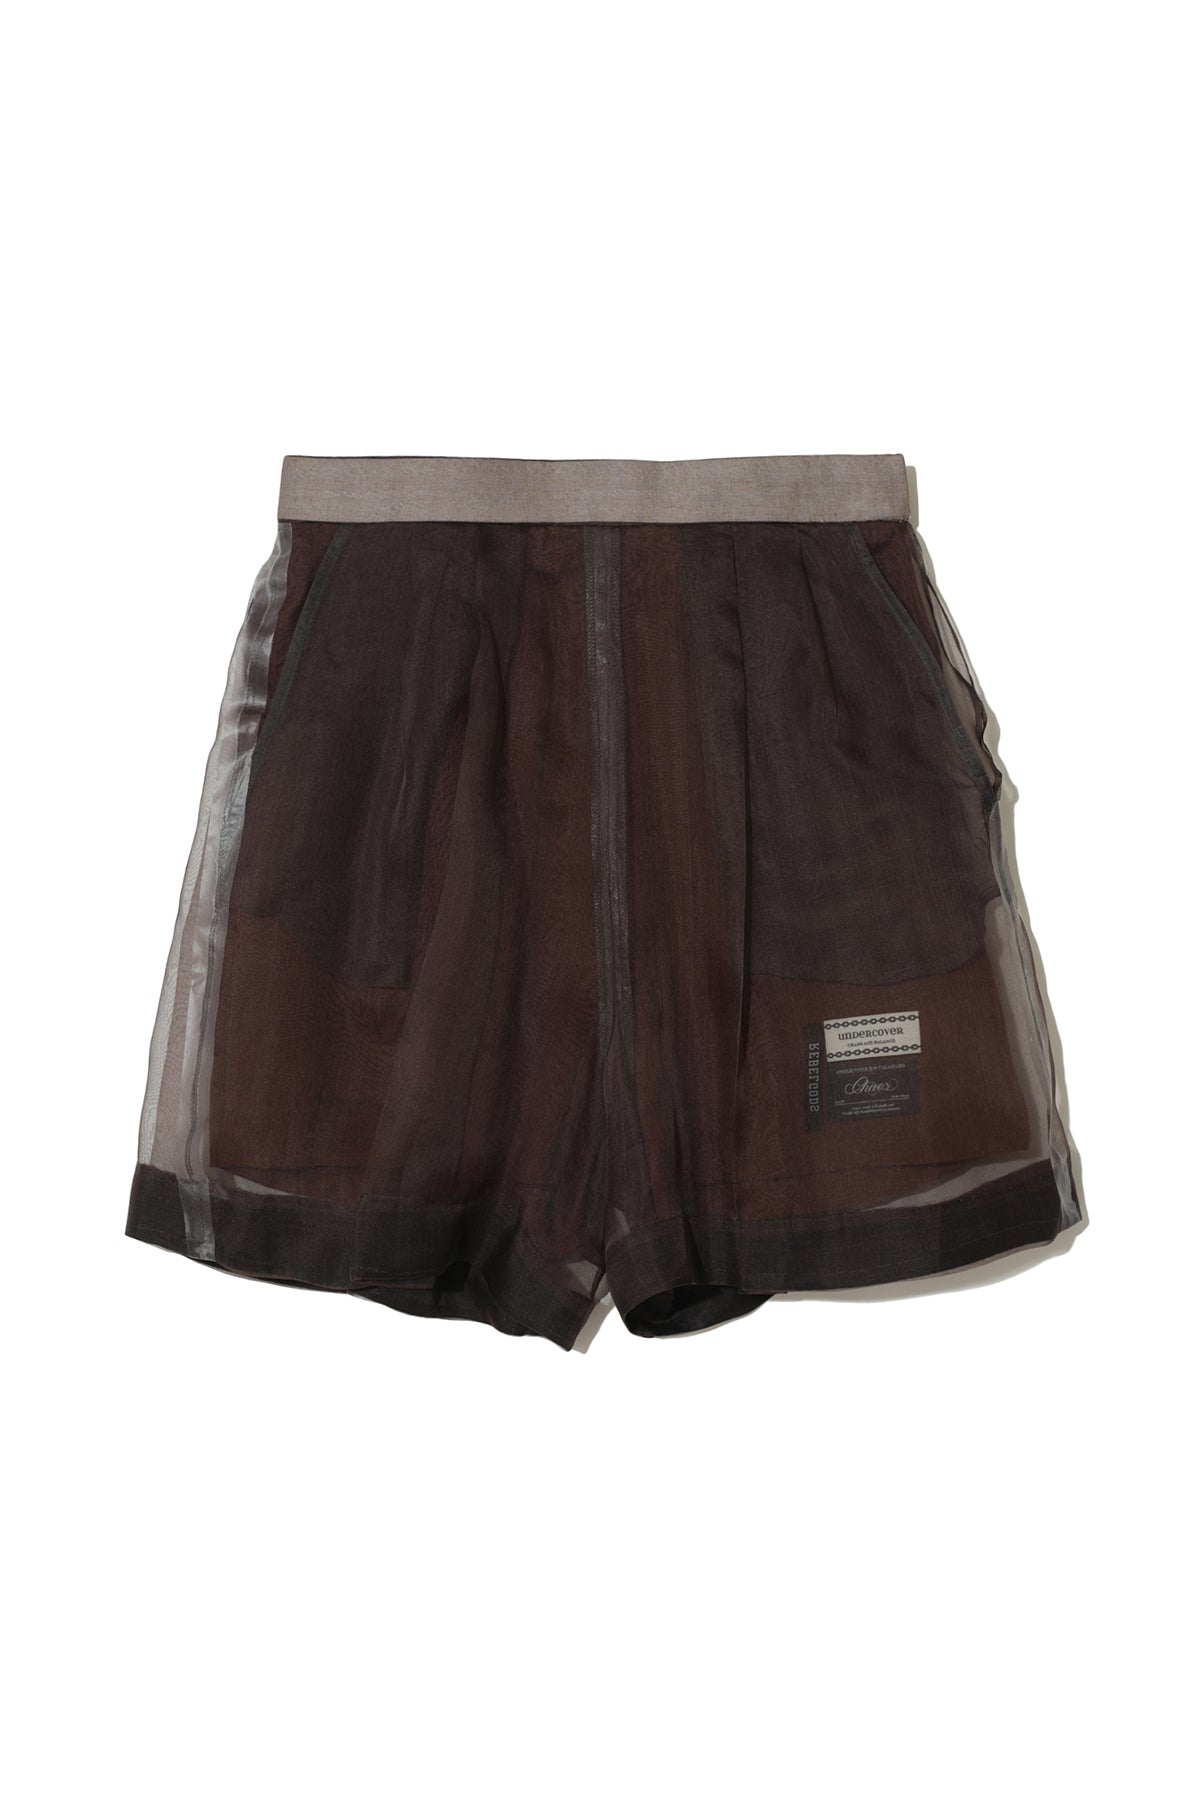 UNDERCOVER | LAYERED SHORTS